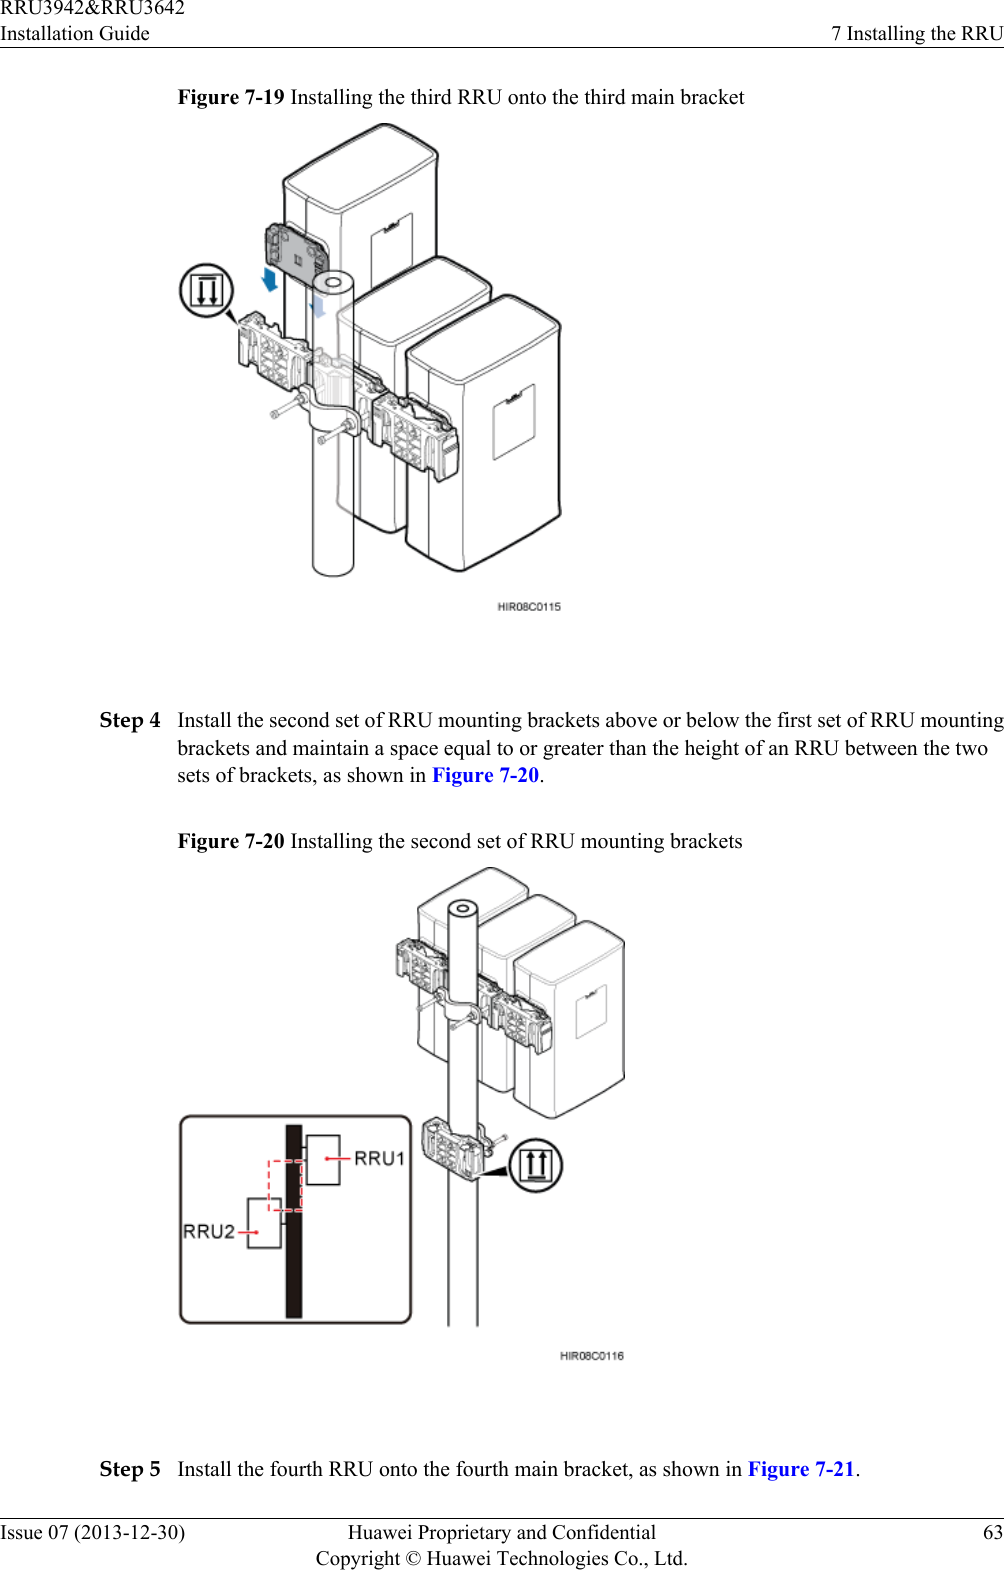 Figure 7-19 Installing the third RRU onto the third main bracket Step 4 Install the second set of RRU mounting brackets above or below the first set of RRU mountingbrackets and maintain a space equal to or greater than the height of an RRU between the twosets of brackets, as shown in Figure 7-20.Figure 7-20 Installing the second set of RRU mounting brackets Step 5 Install the fourth RRU onto the fourth main bracket, as shown in Figure 7-21.RRU3942&amp;RRU3642Installation Guide 7 Installing the RRUIssue 07 (2013-12-30) Huawei Proprietary and ConfidentialCopyright © Huawei Technologies Co., Ltd.63